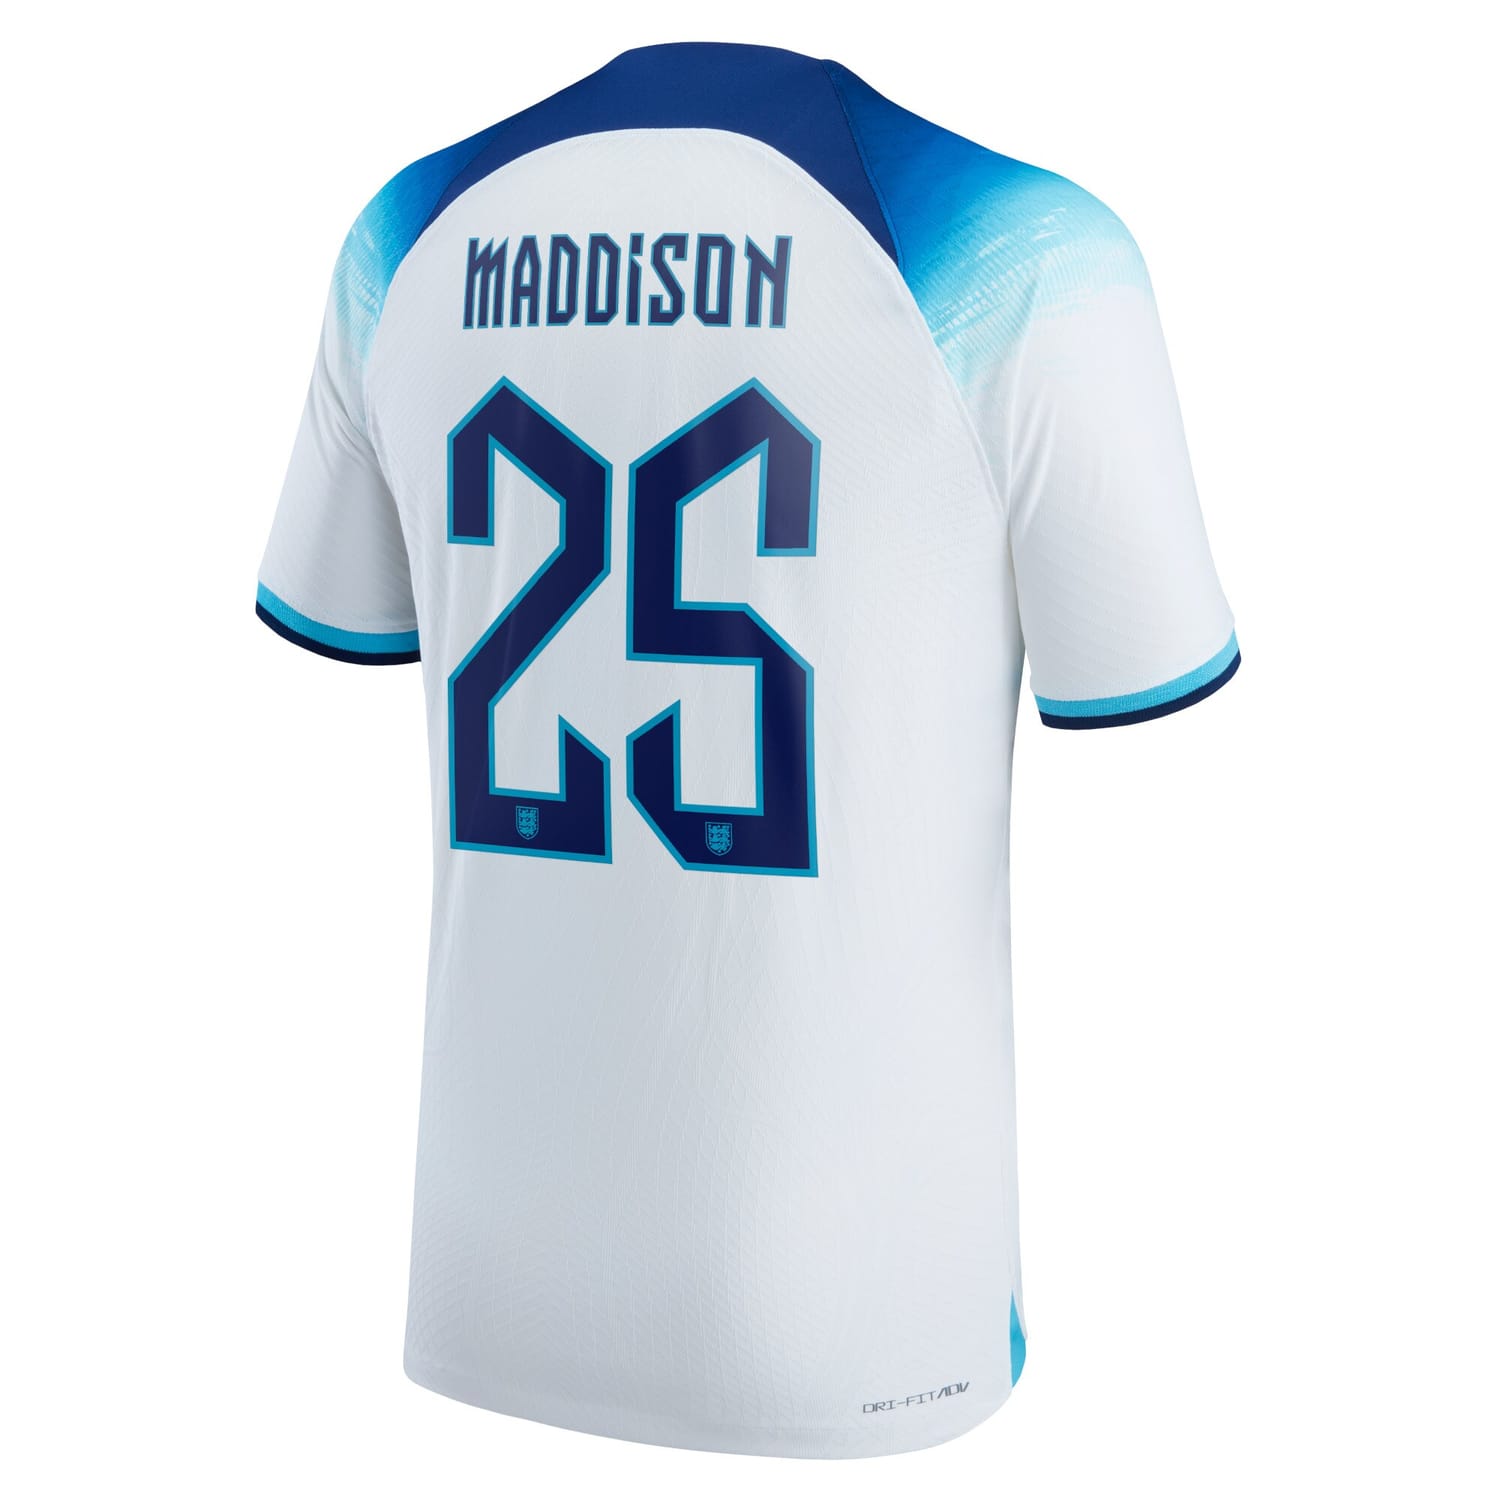 England National Team Home Authentic Jersey Shirt 2022 player James Maddison 25 printing for Men